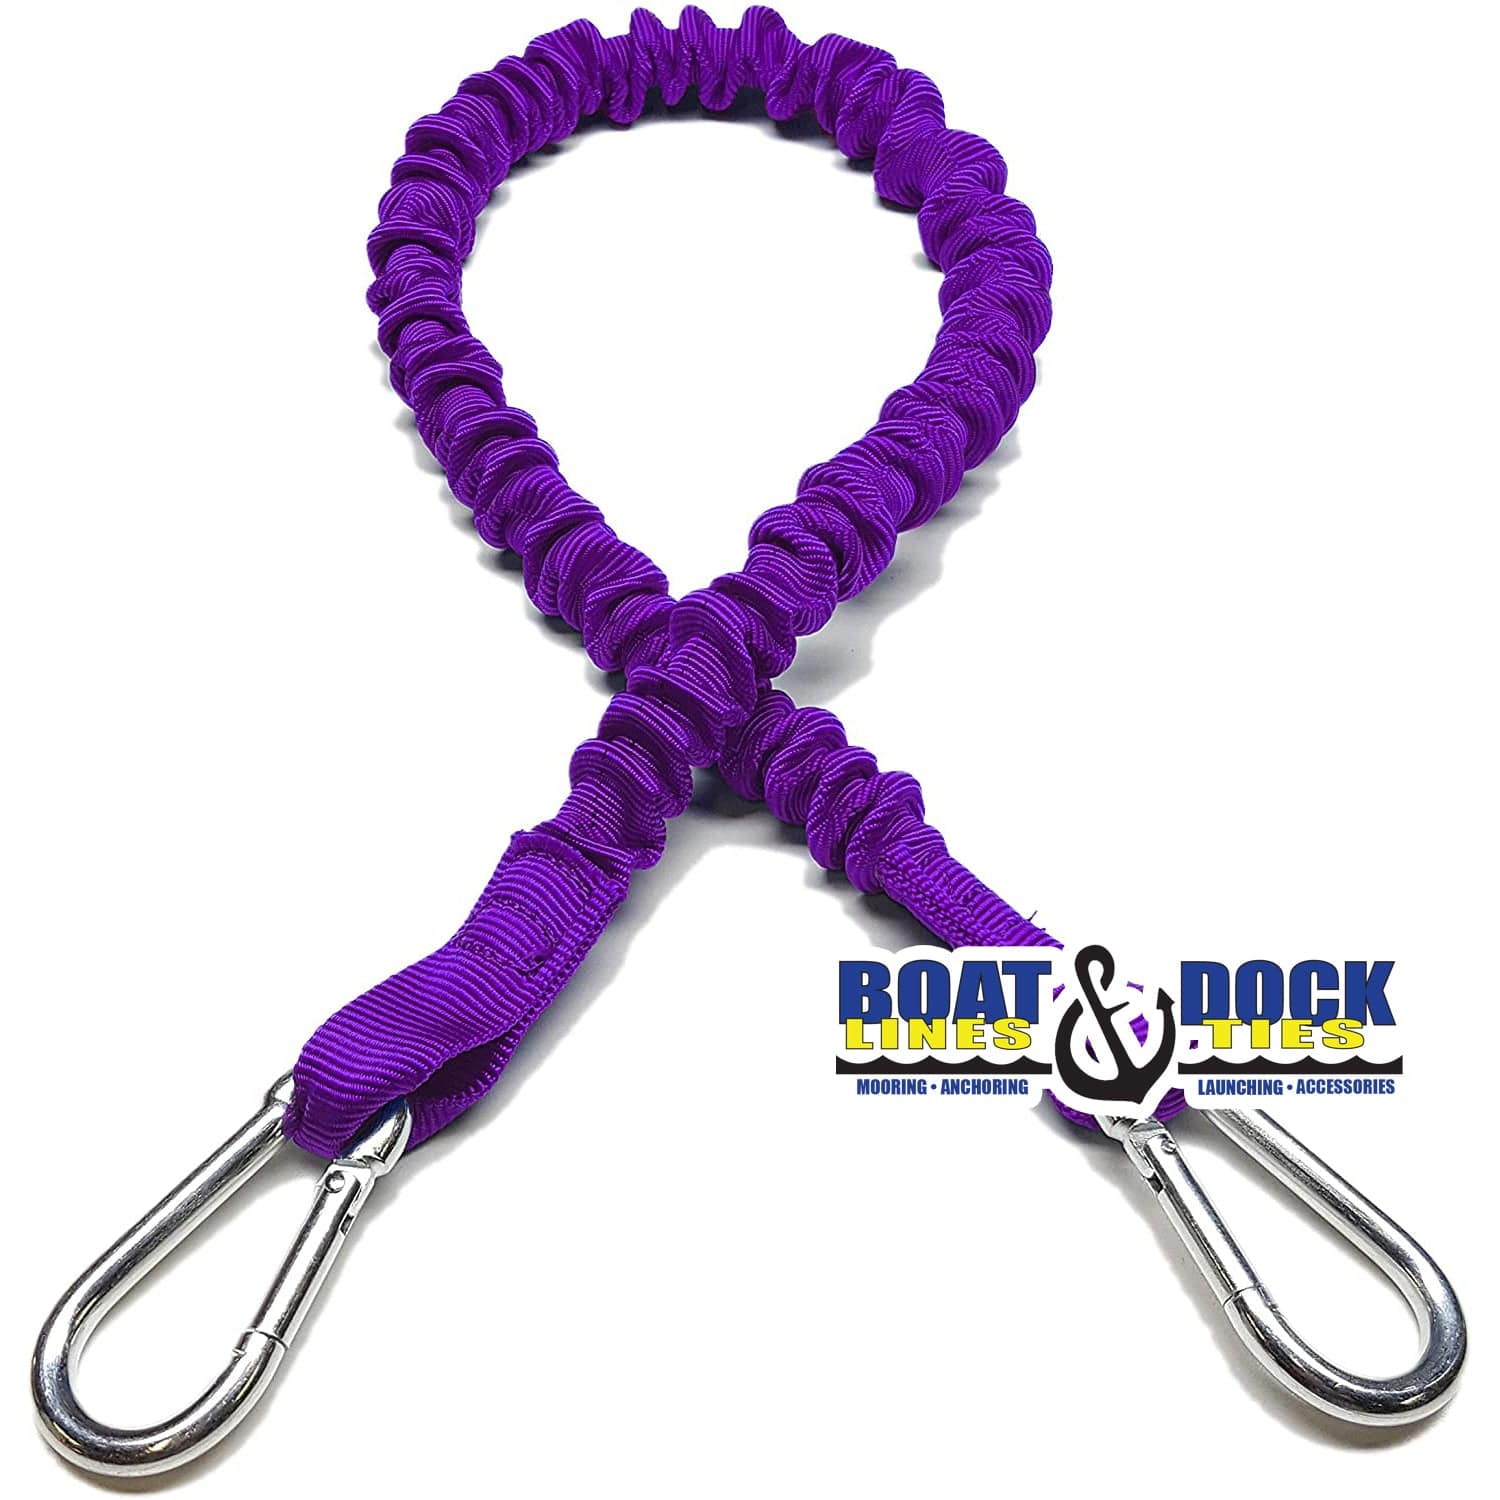 Boat Dock Tie Bungee Cords, 2 Hooked Ends, UV Protected Bungee Cords - Set of 2 - Made in USA - Boat Lines & Dock Ties Boat Lines & Dock Ties 36" / Purple